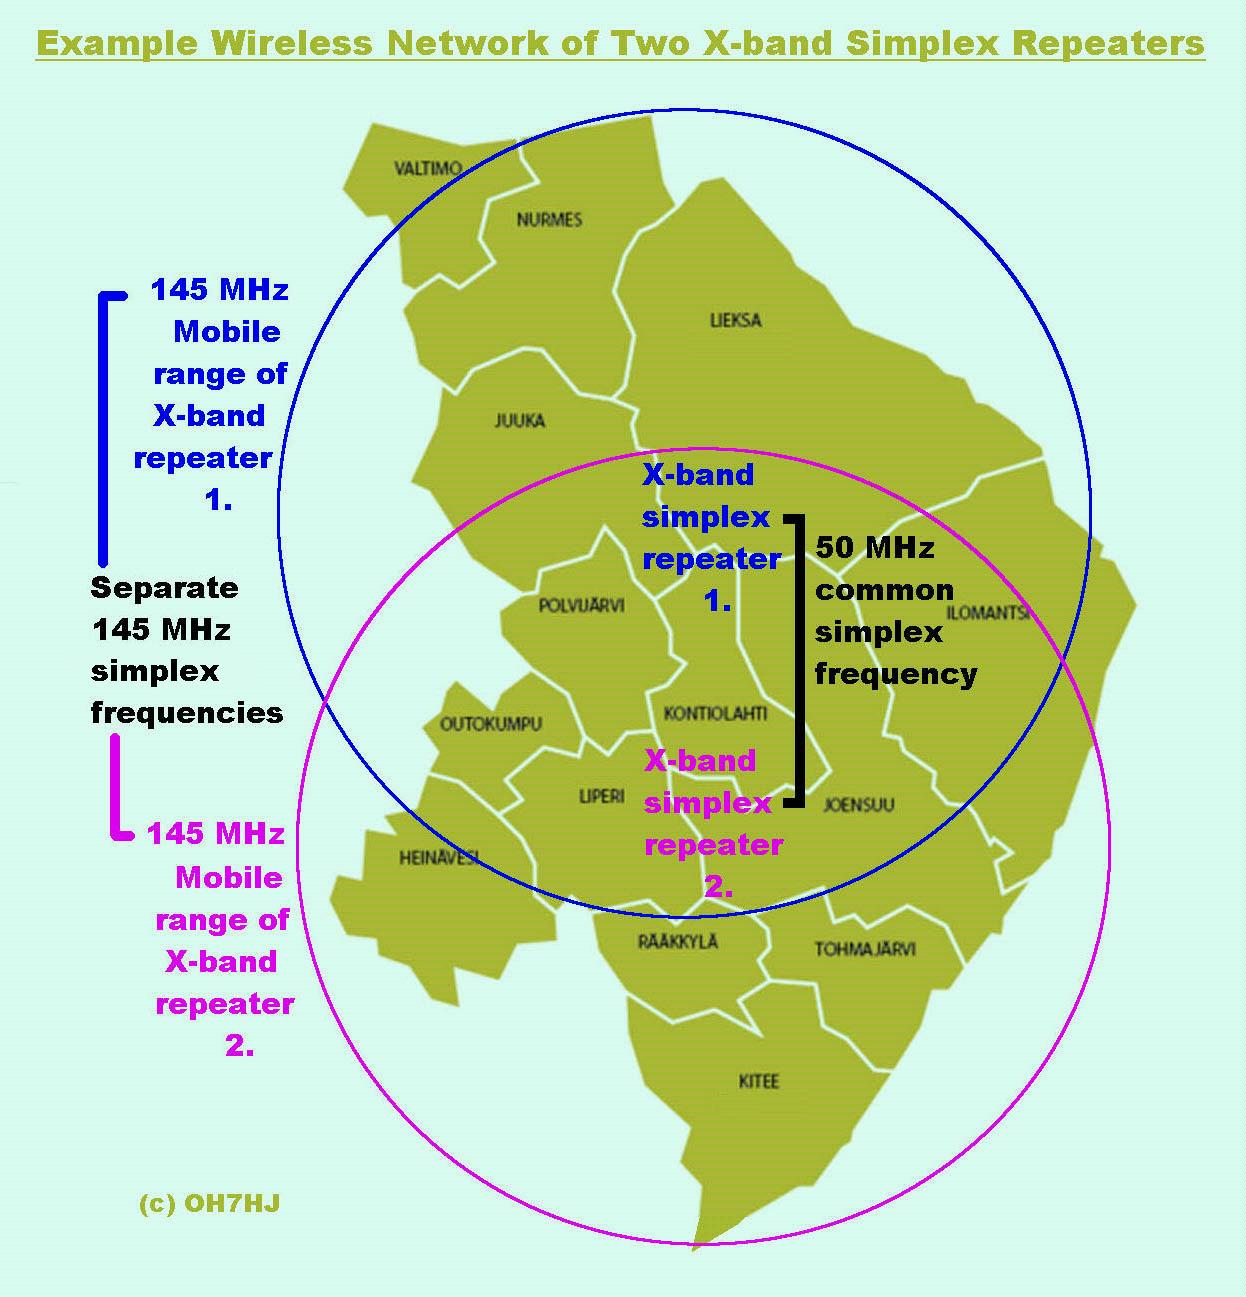 Example Wireless Network of Two X-band Simplex Repeaters to Cover North Carelia (c) OH7HJ.jpg